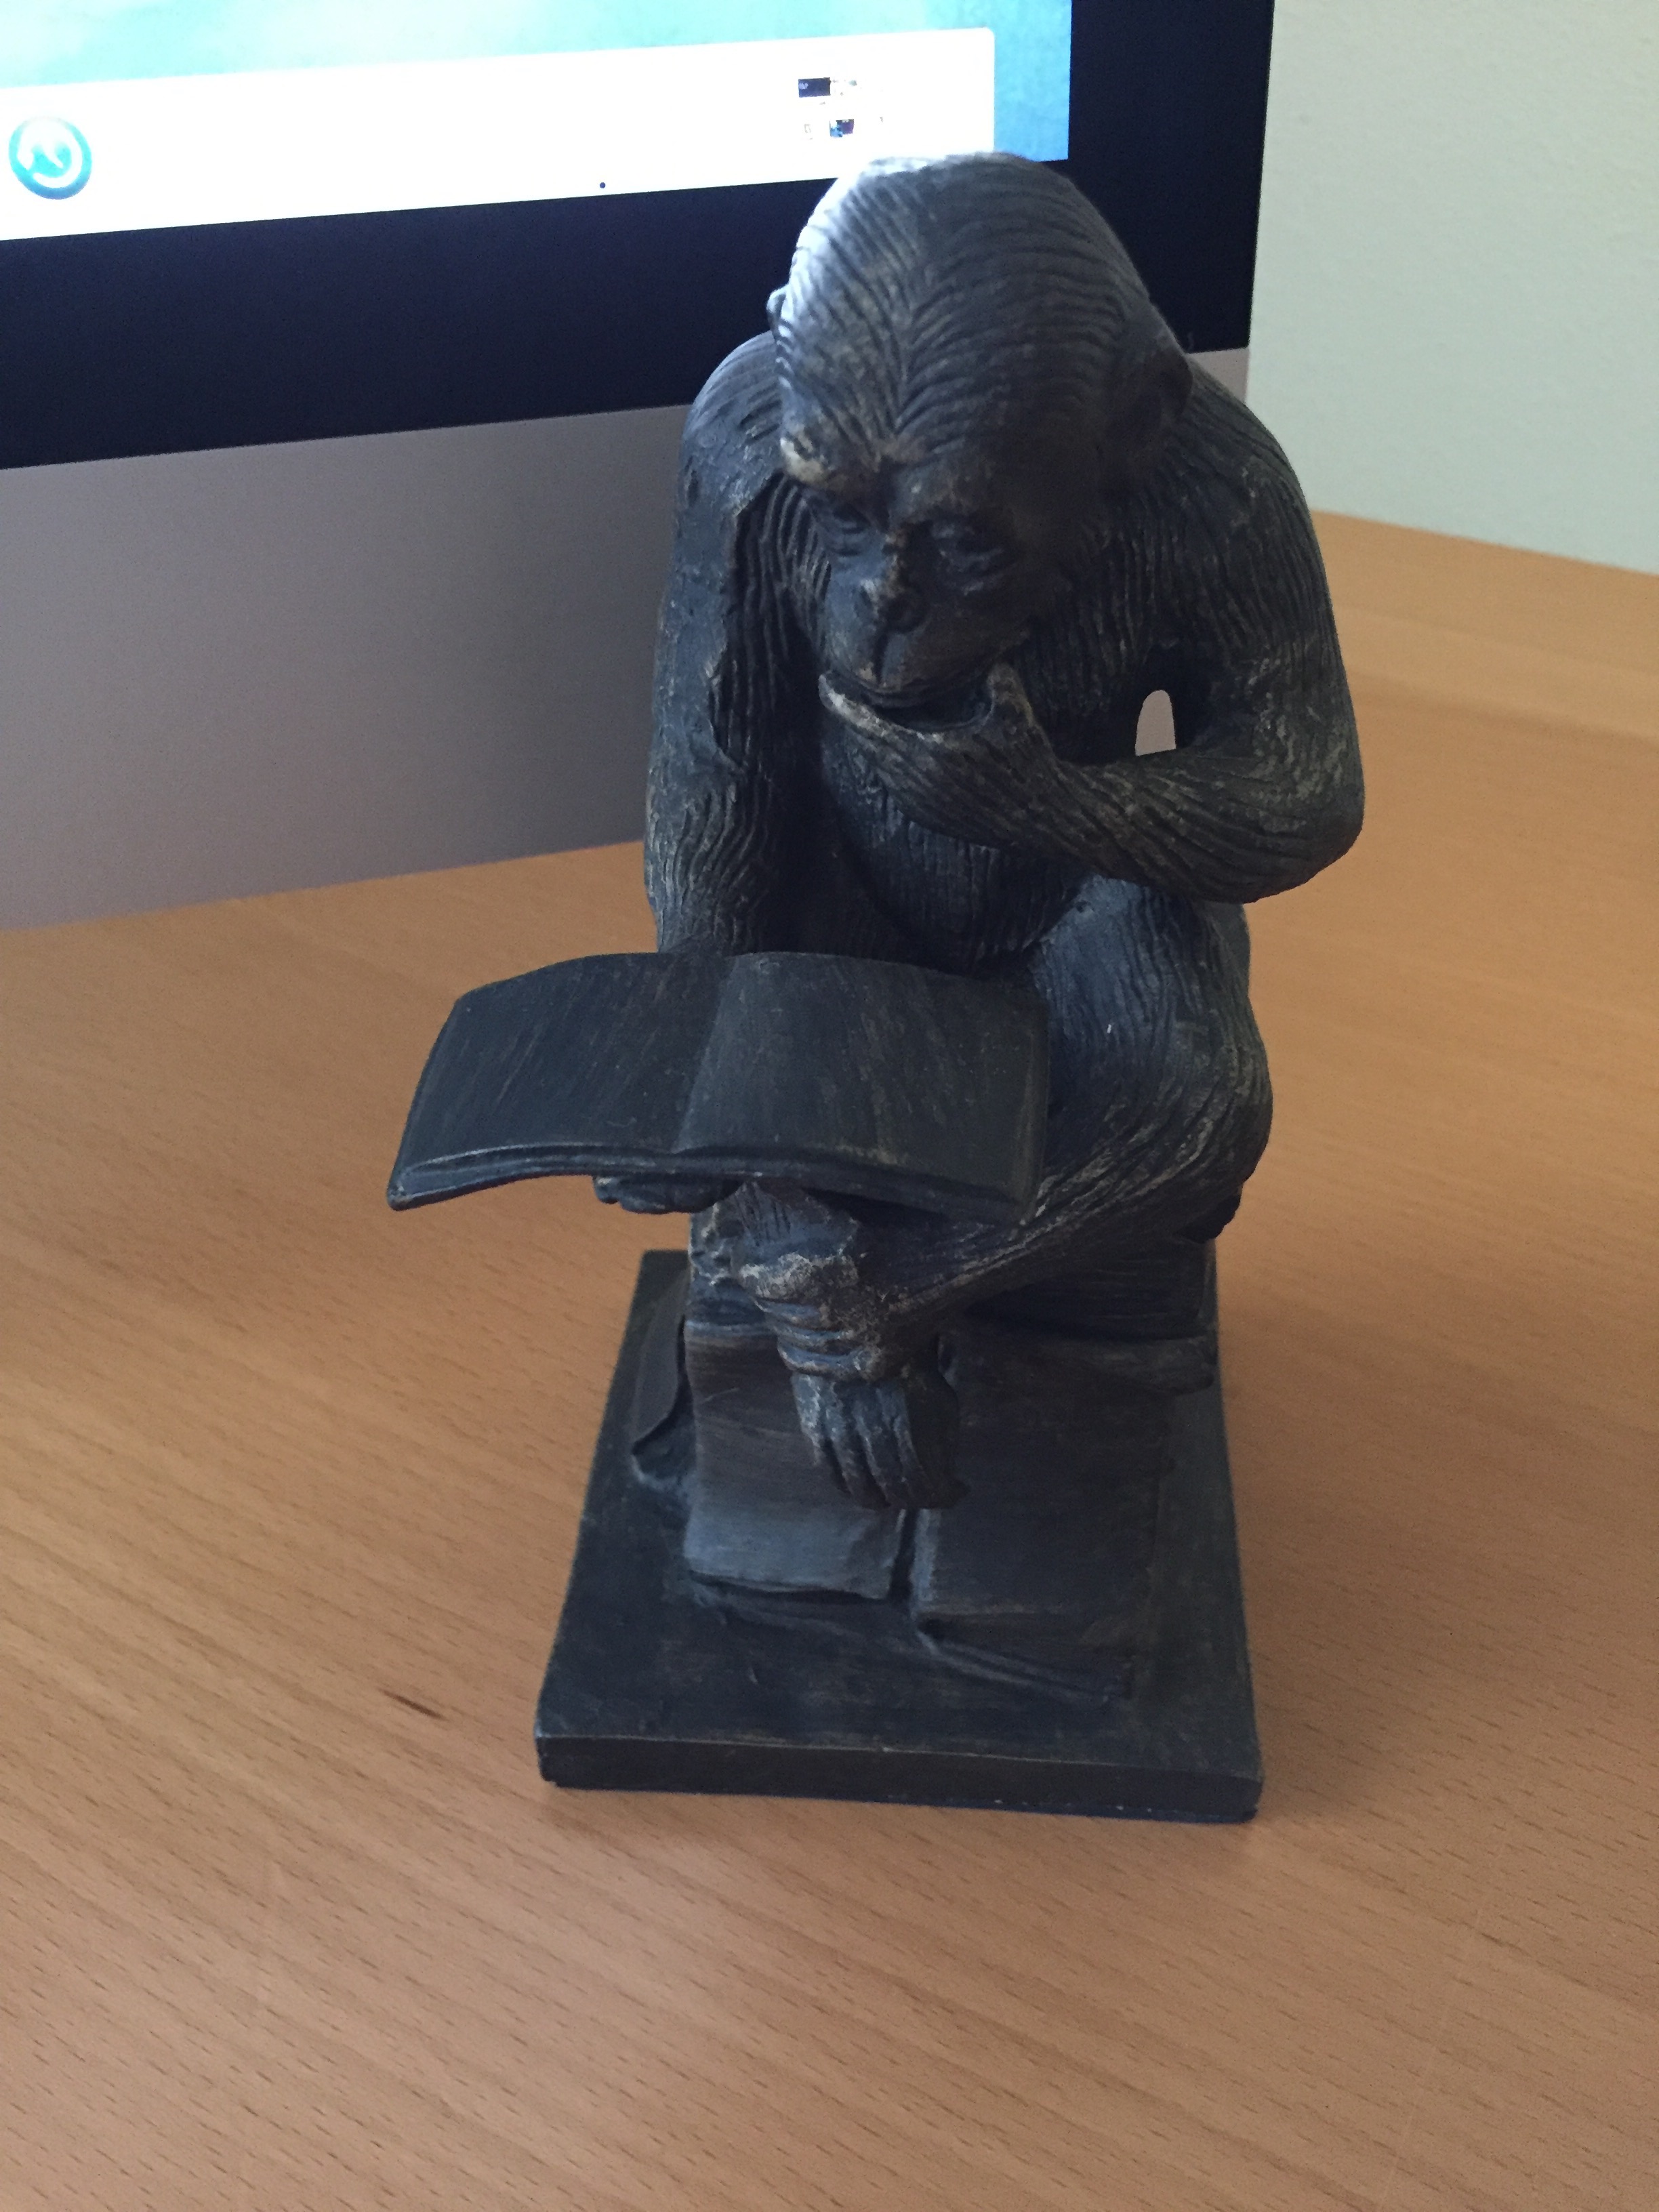 Photograph of a bronze bookend of a thoughtful monkey reading a book